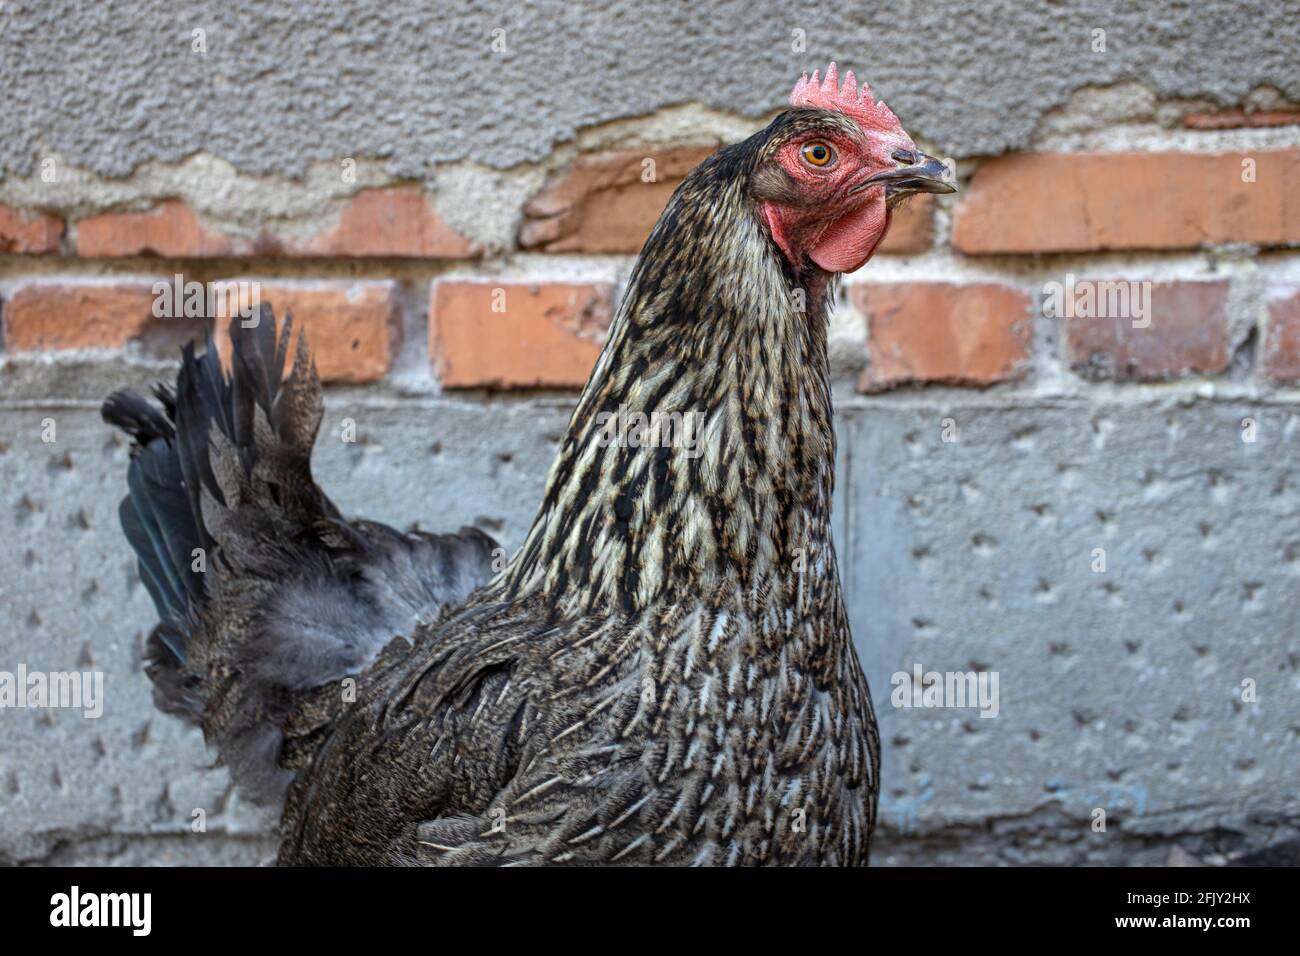 Colorful hen with red comb is standing alerted over an old wall with bricks exposed. Stock Photo